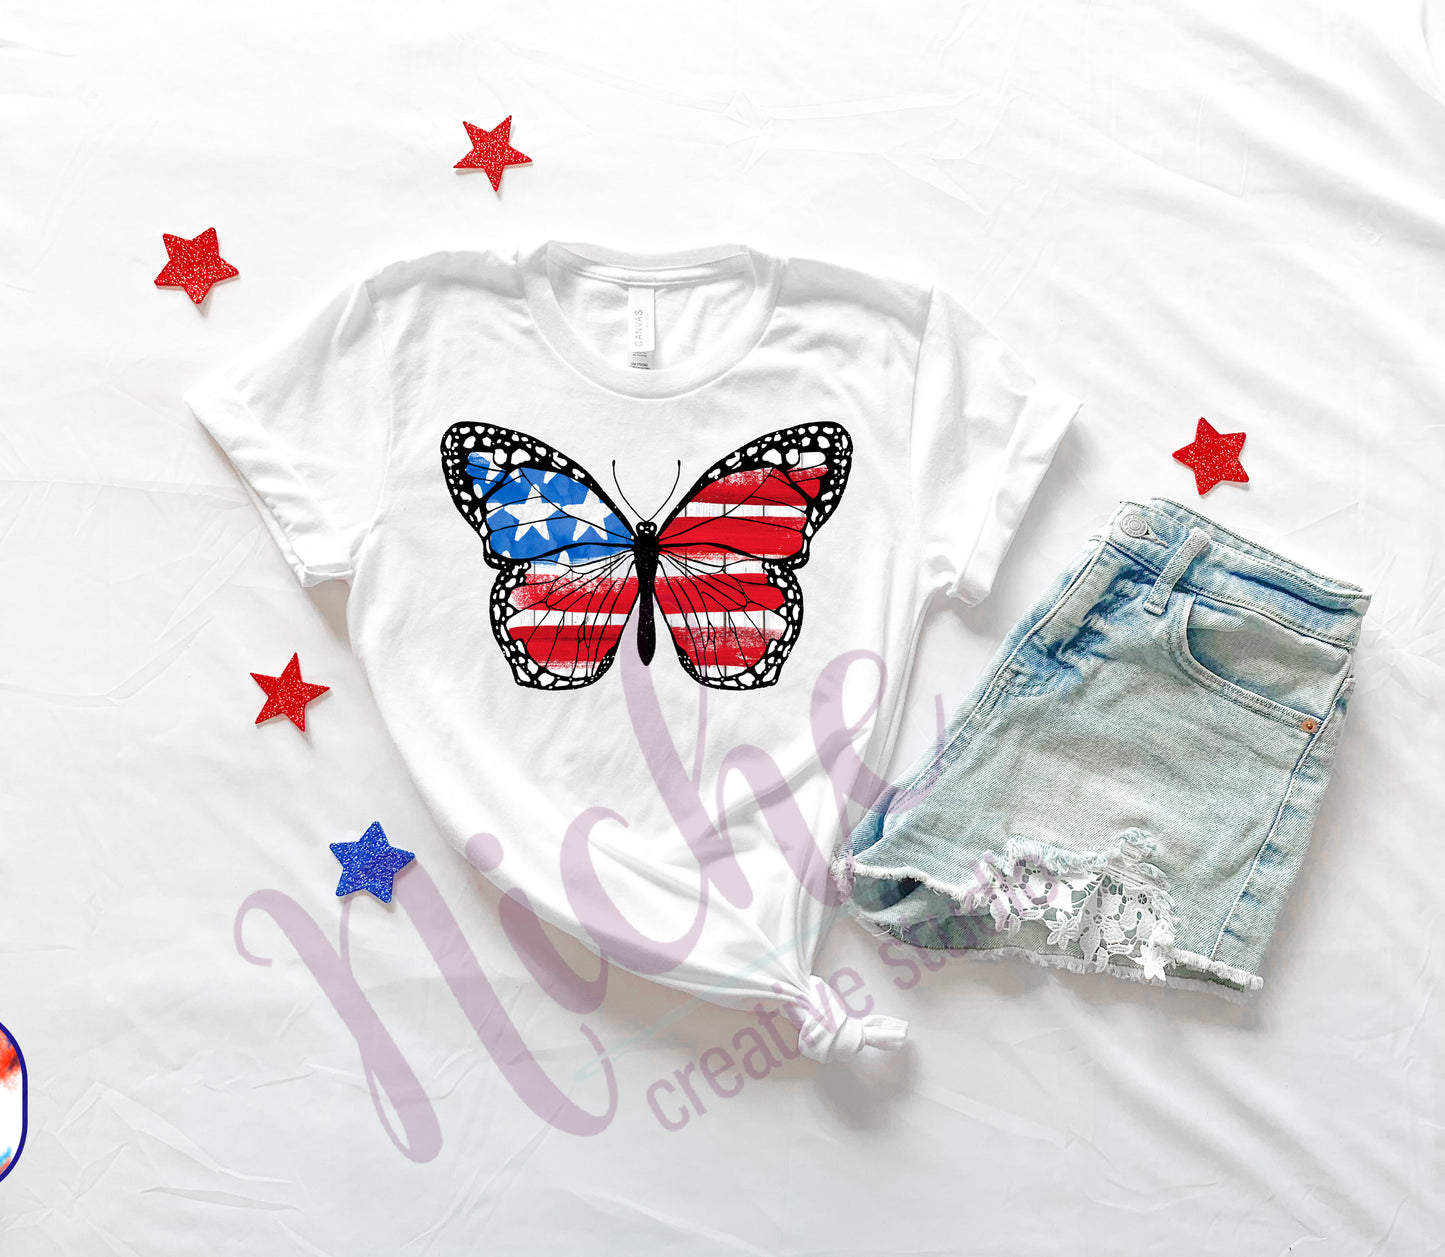 * Patriotic Butterfuy Decal